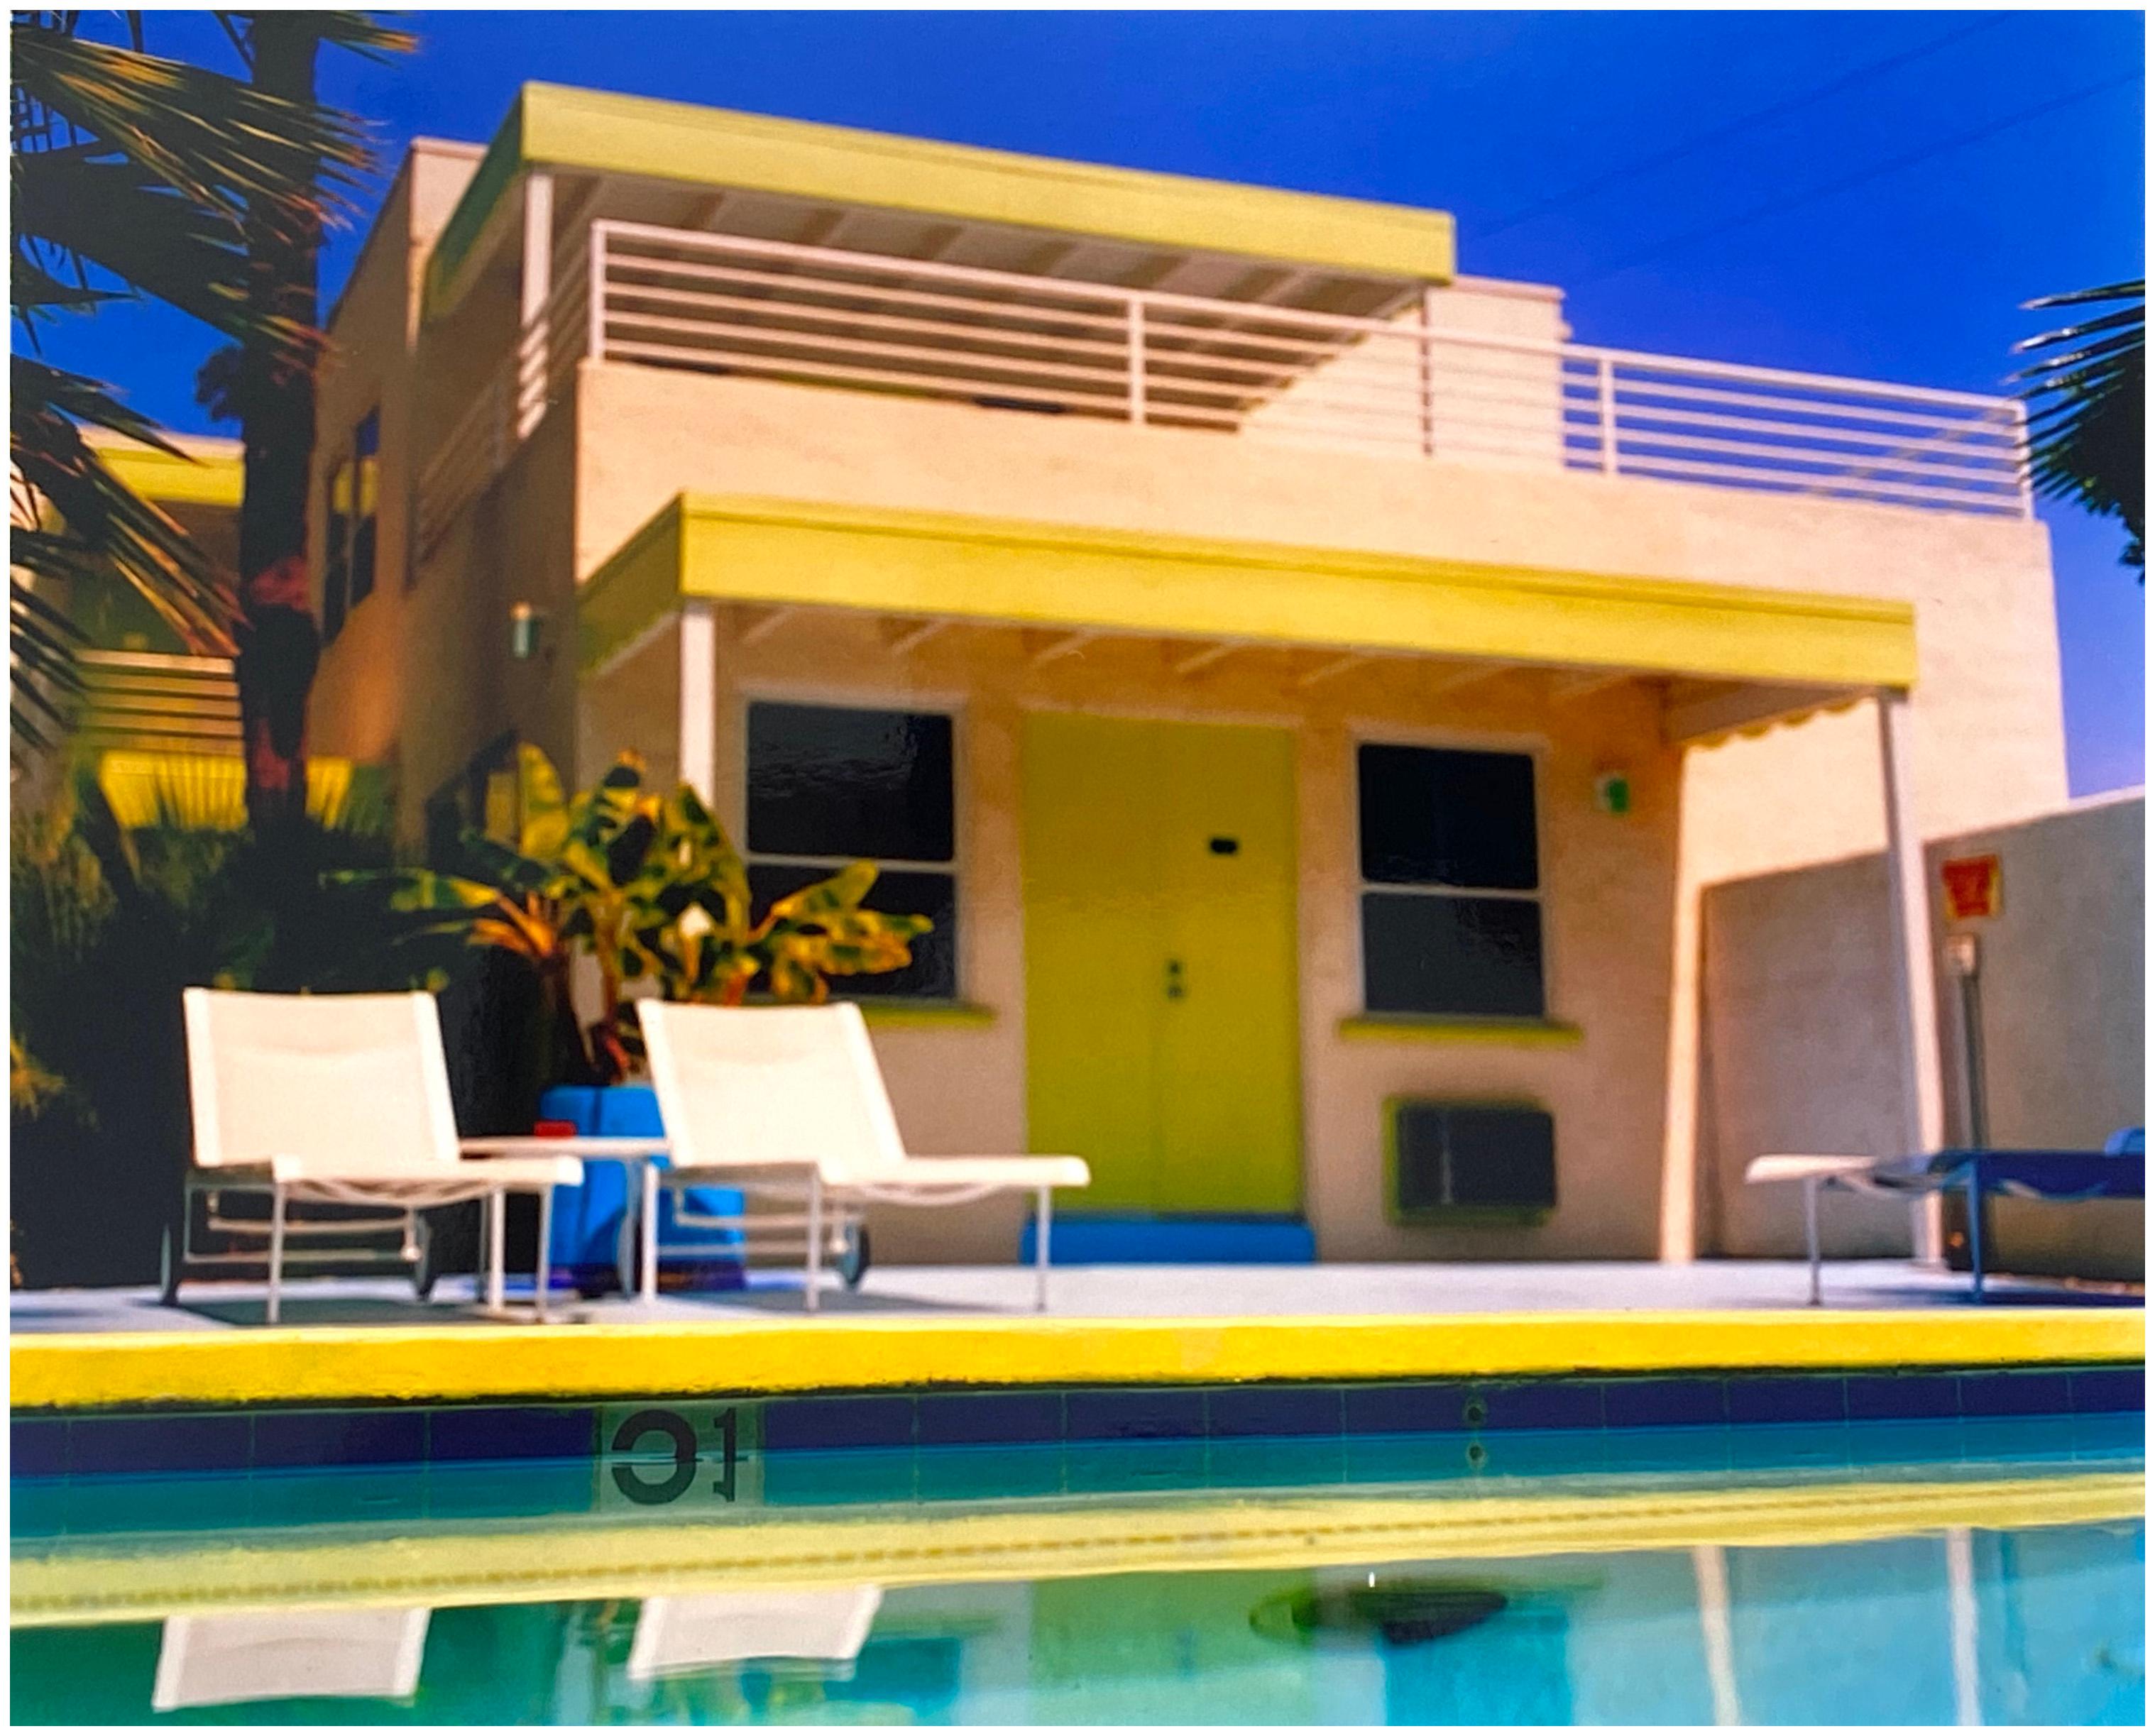 Richard Heeps Landscape Photograph - Palm Springs Poolside I, California - American Architecture Color Photography